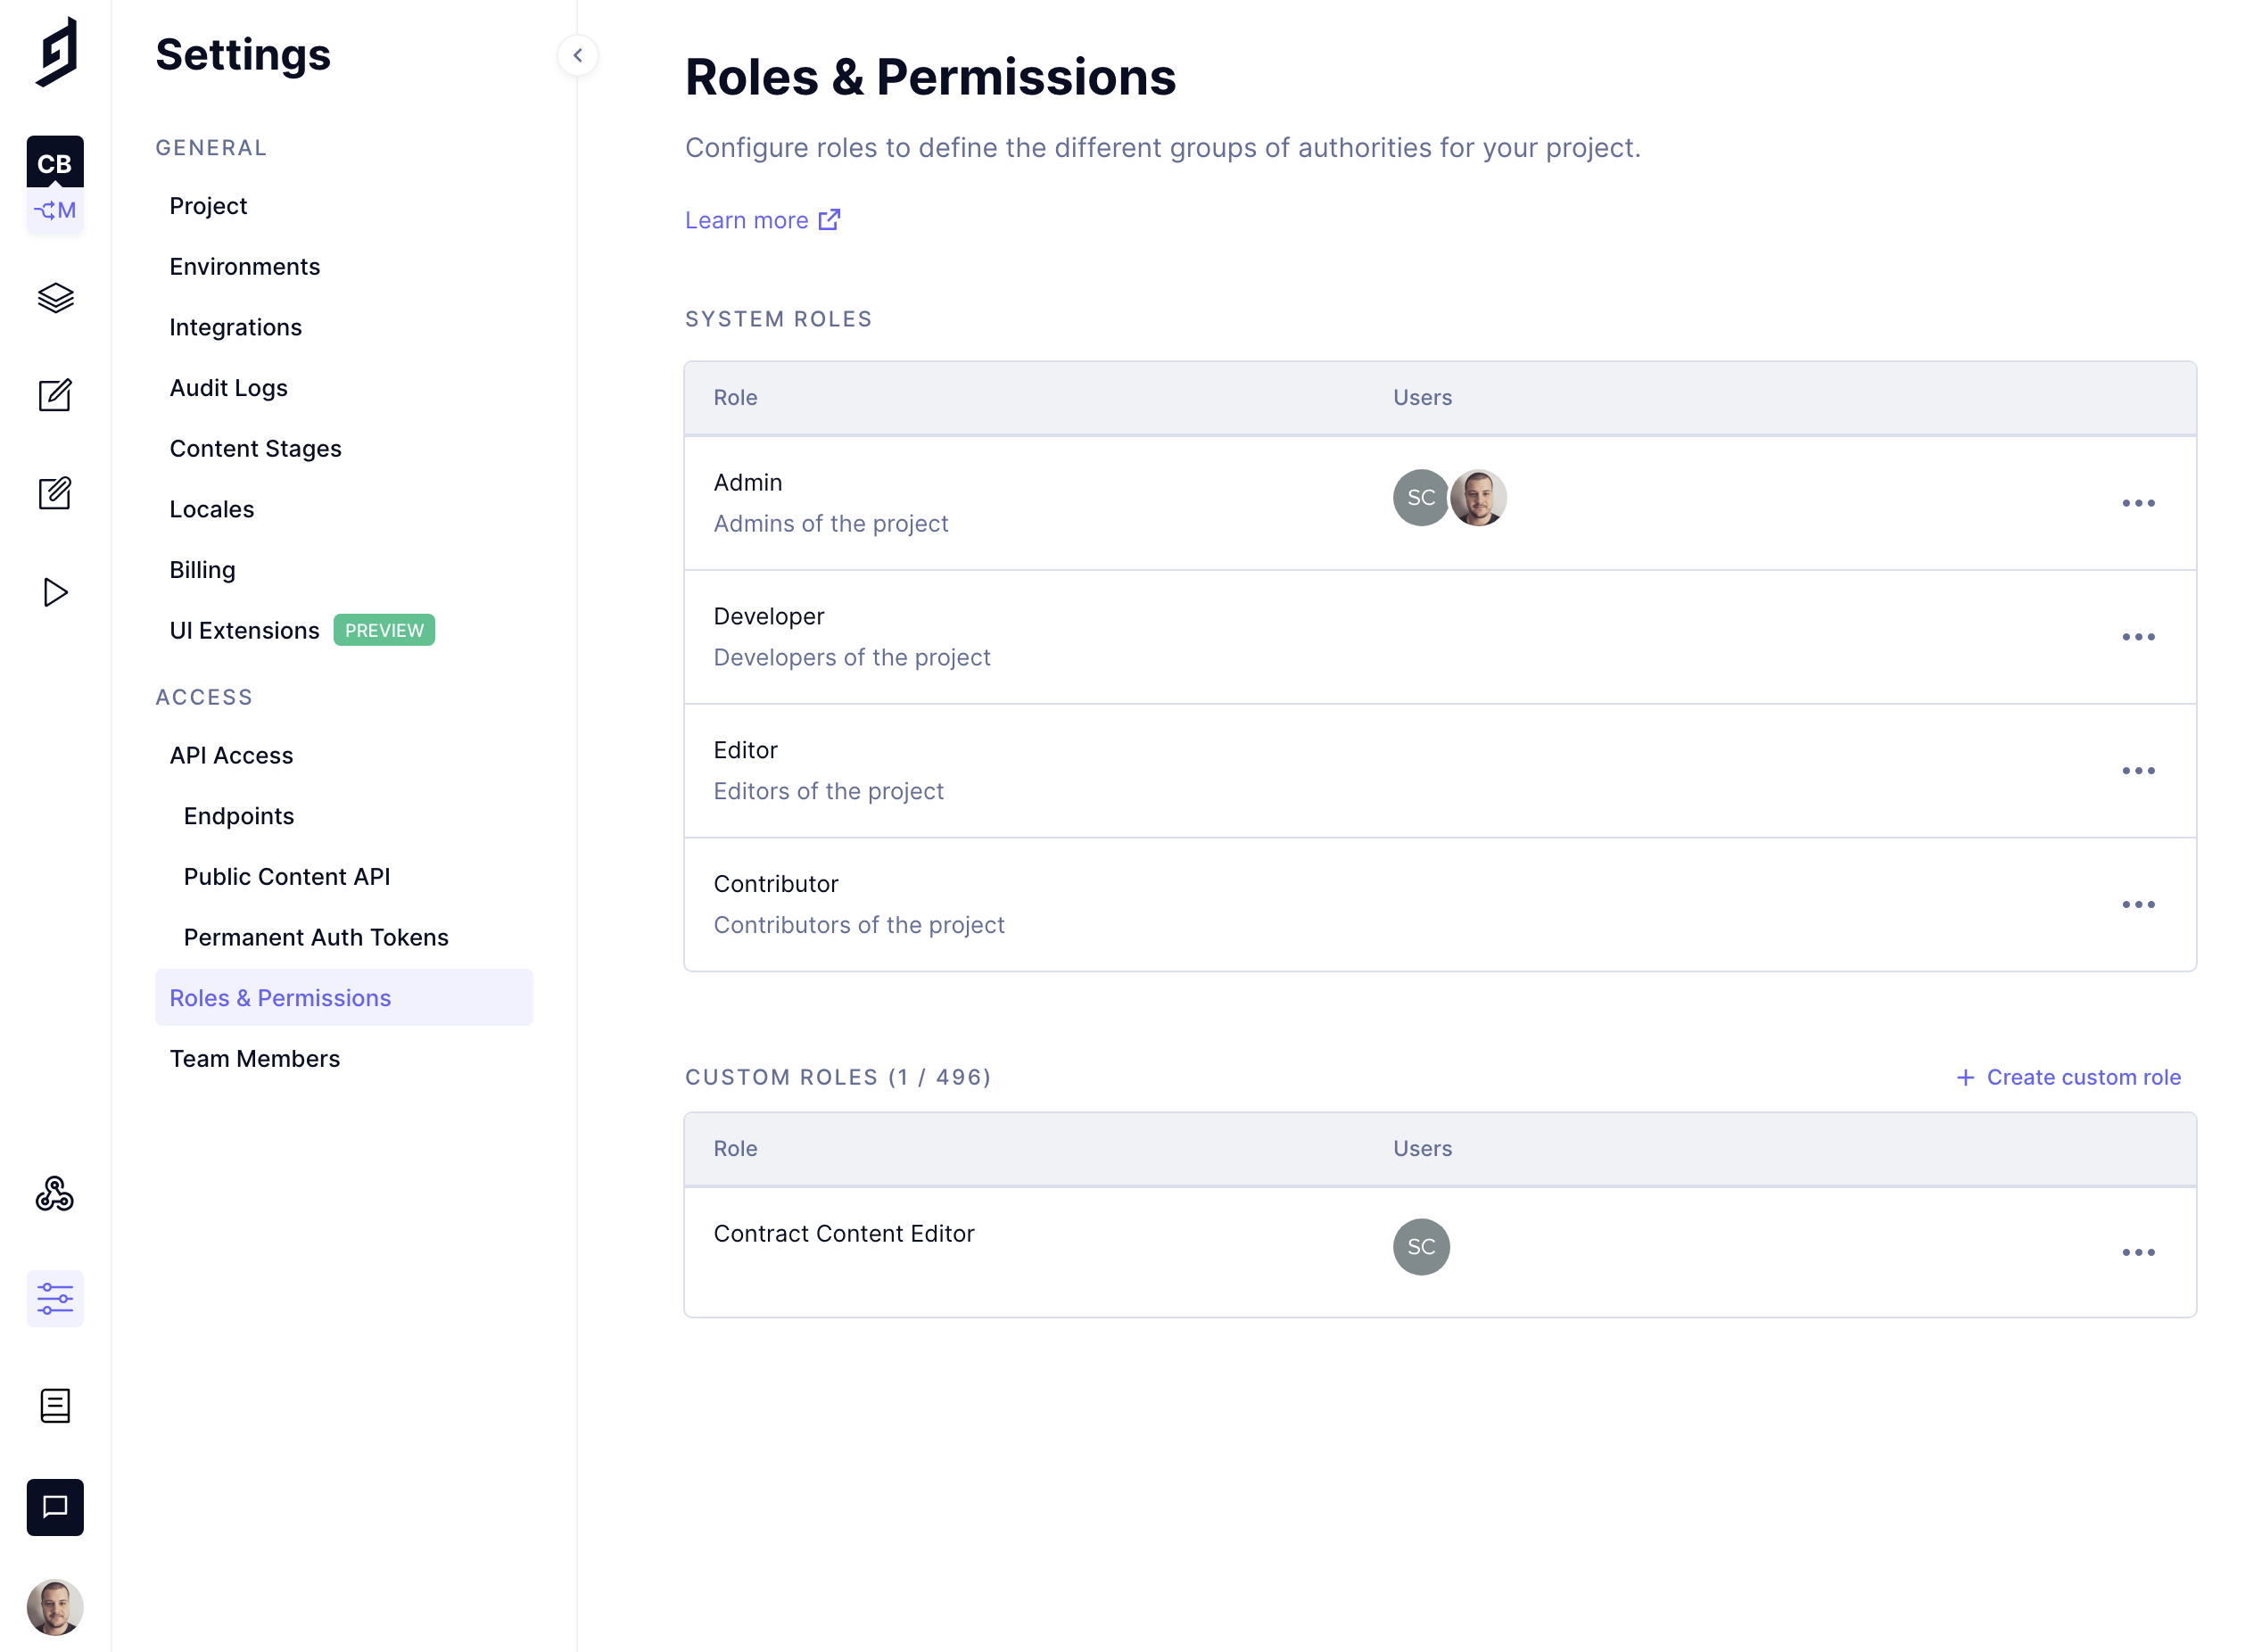 Roles and Permissions overview